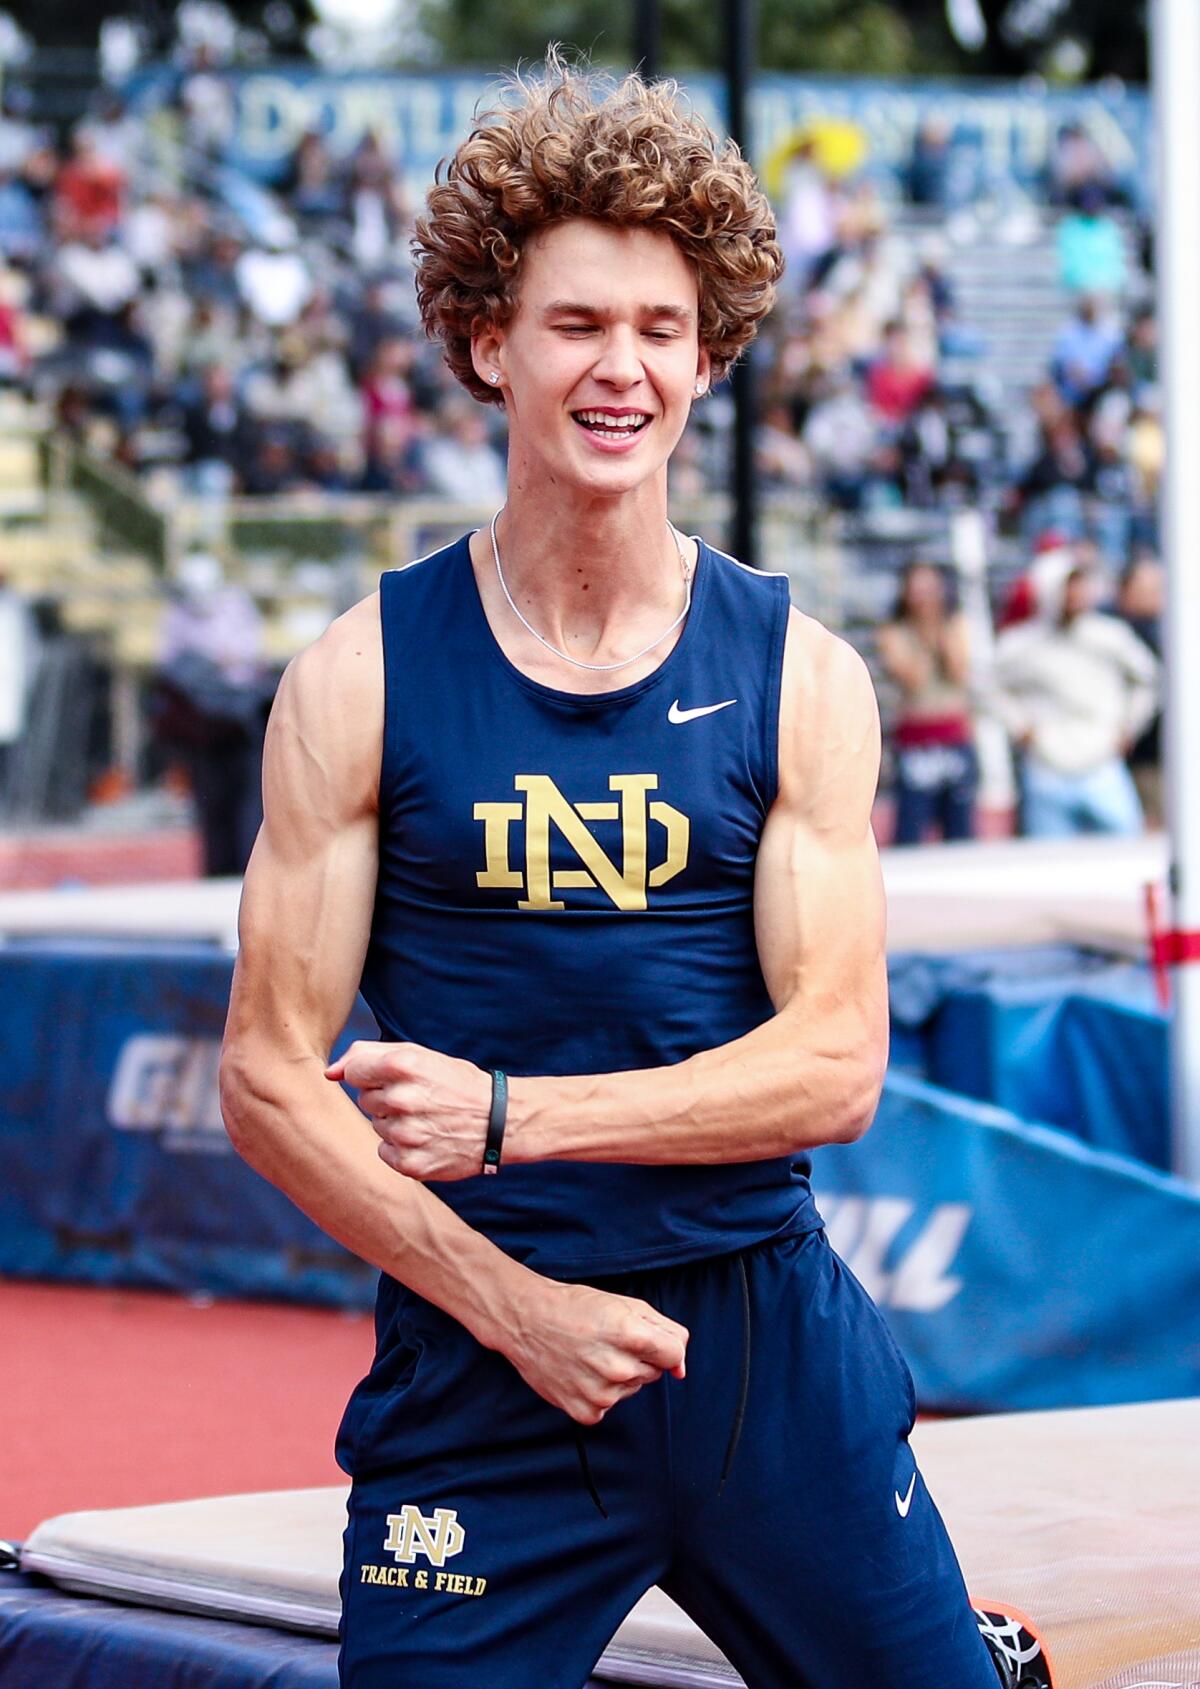 Sophomore JJ Harel of Sherman Oaks Notre Dame reacts to clearing 6-10.25 in high jump.